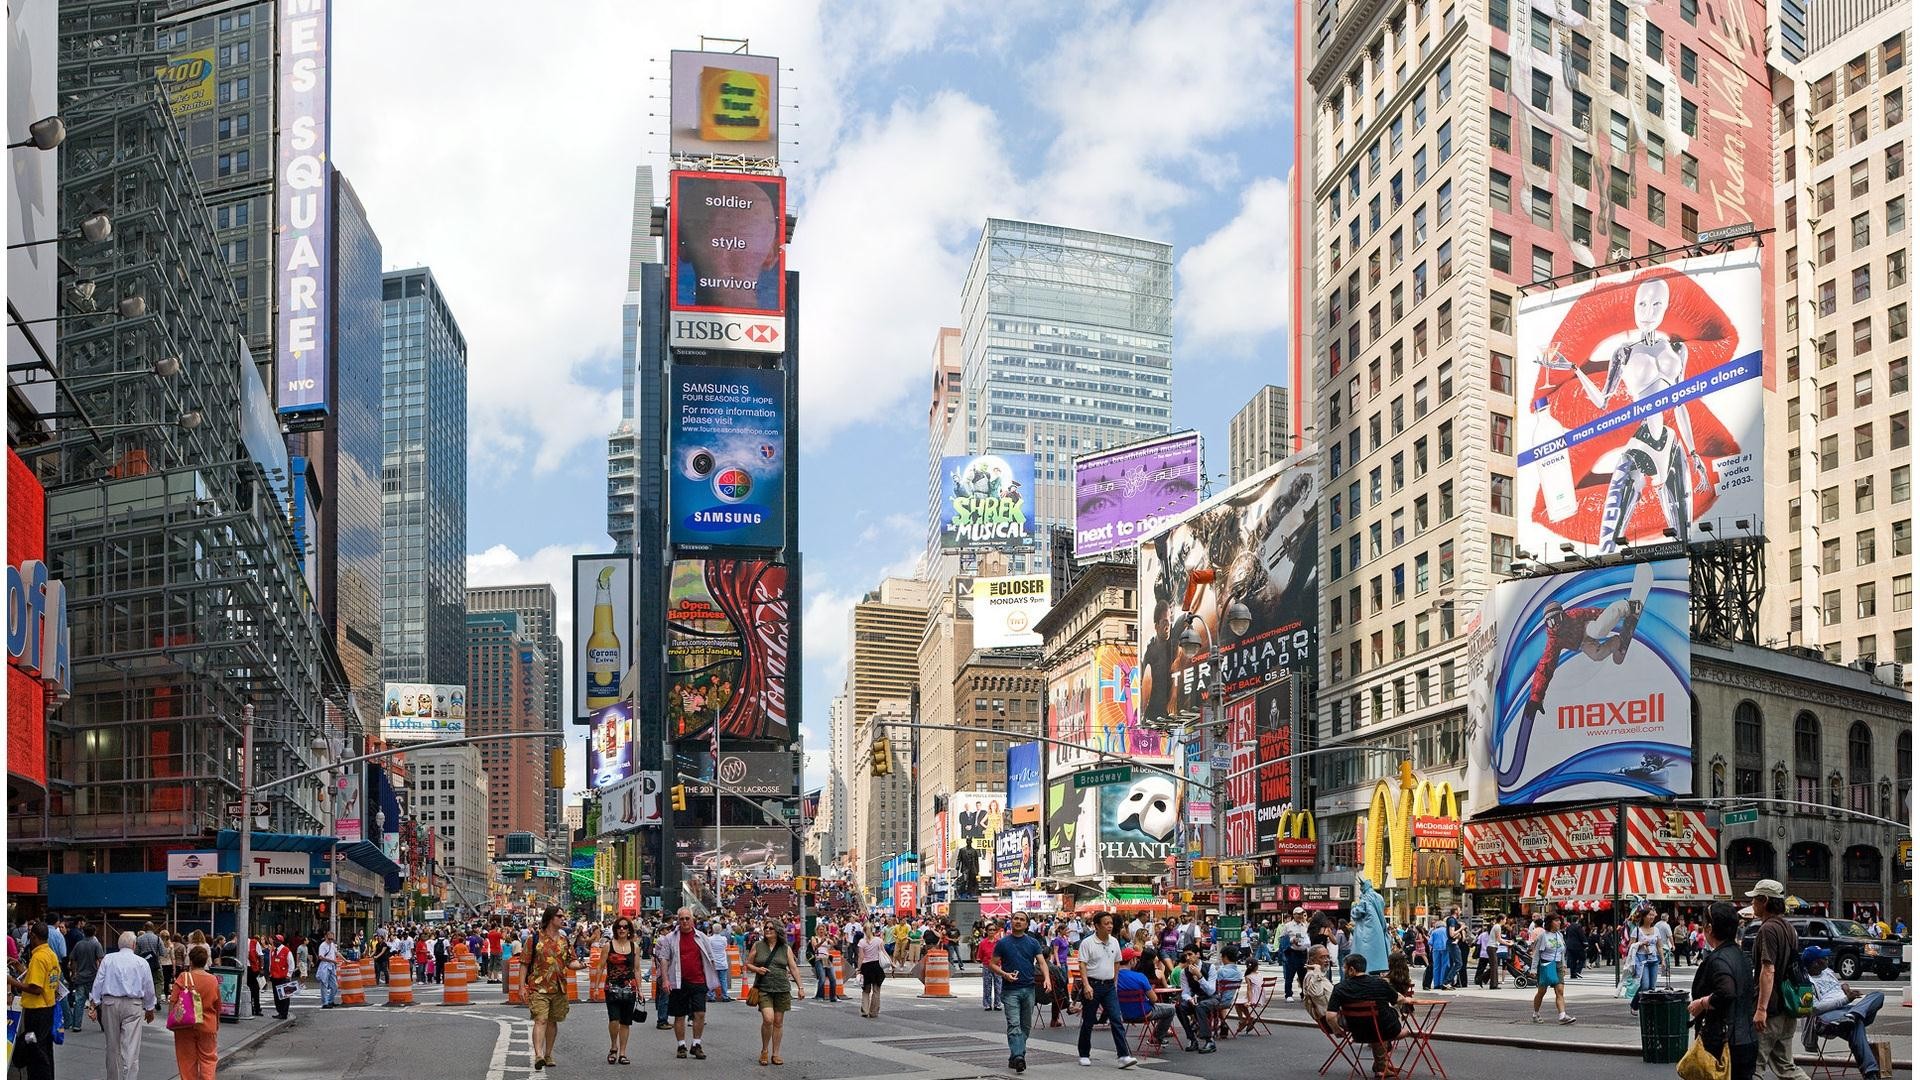 Cityscapes New York City Times Square wallpaper 1920x1080